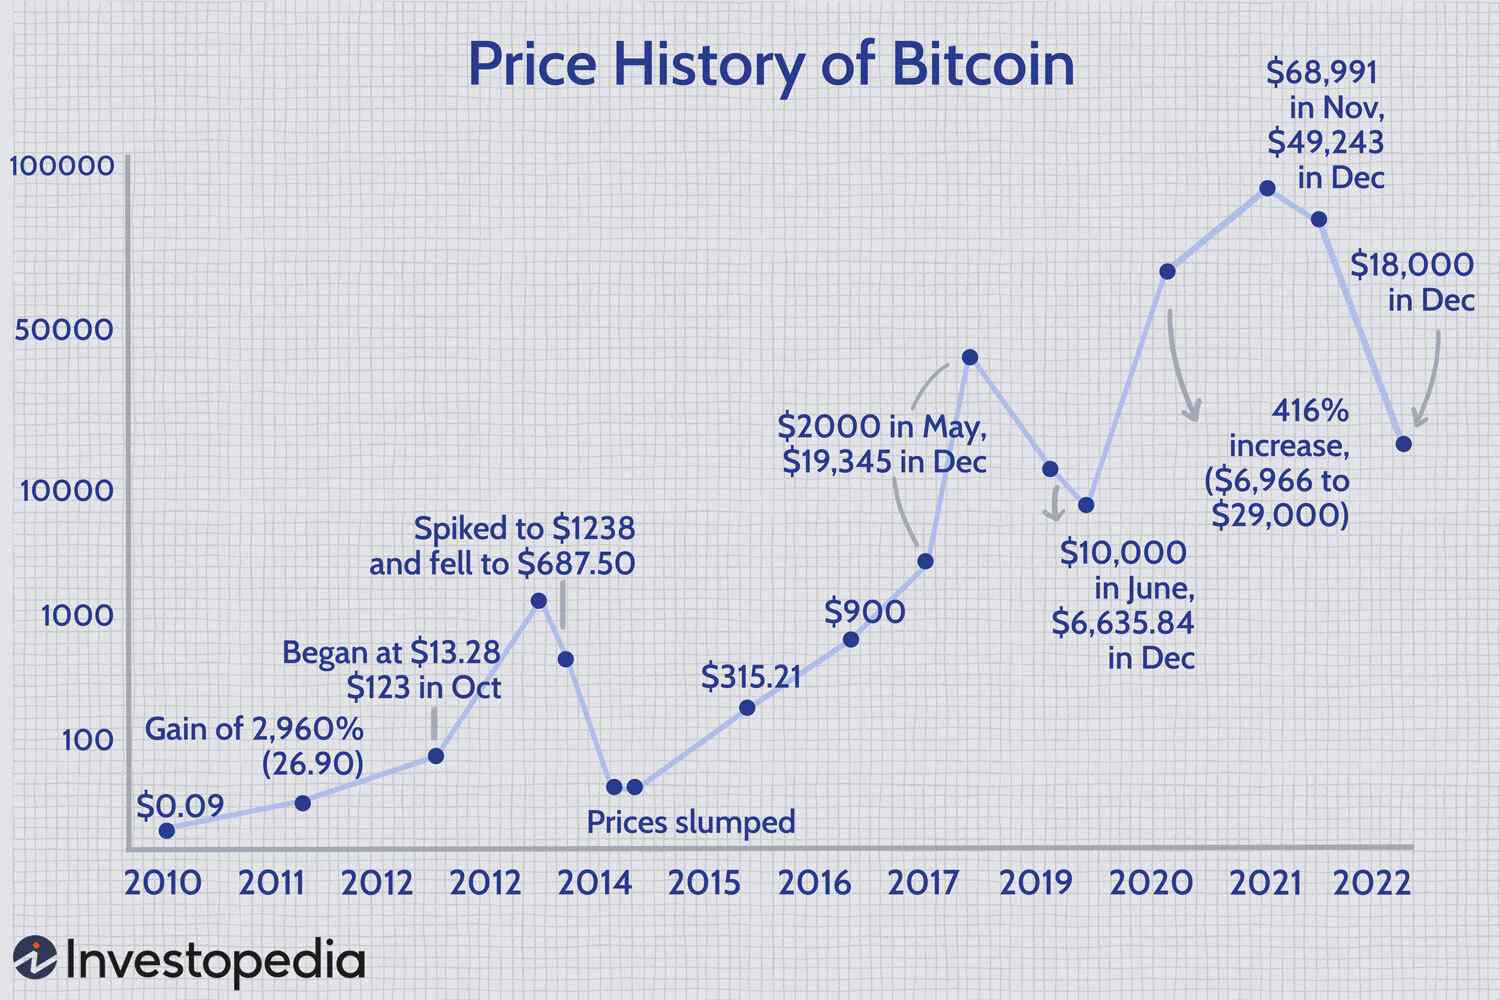 Bitcoin: why the price has exploded – and where it goes from here